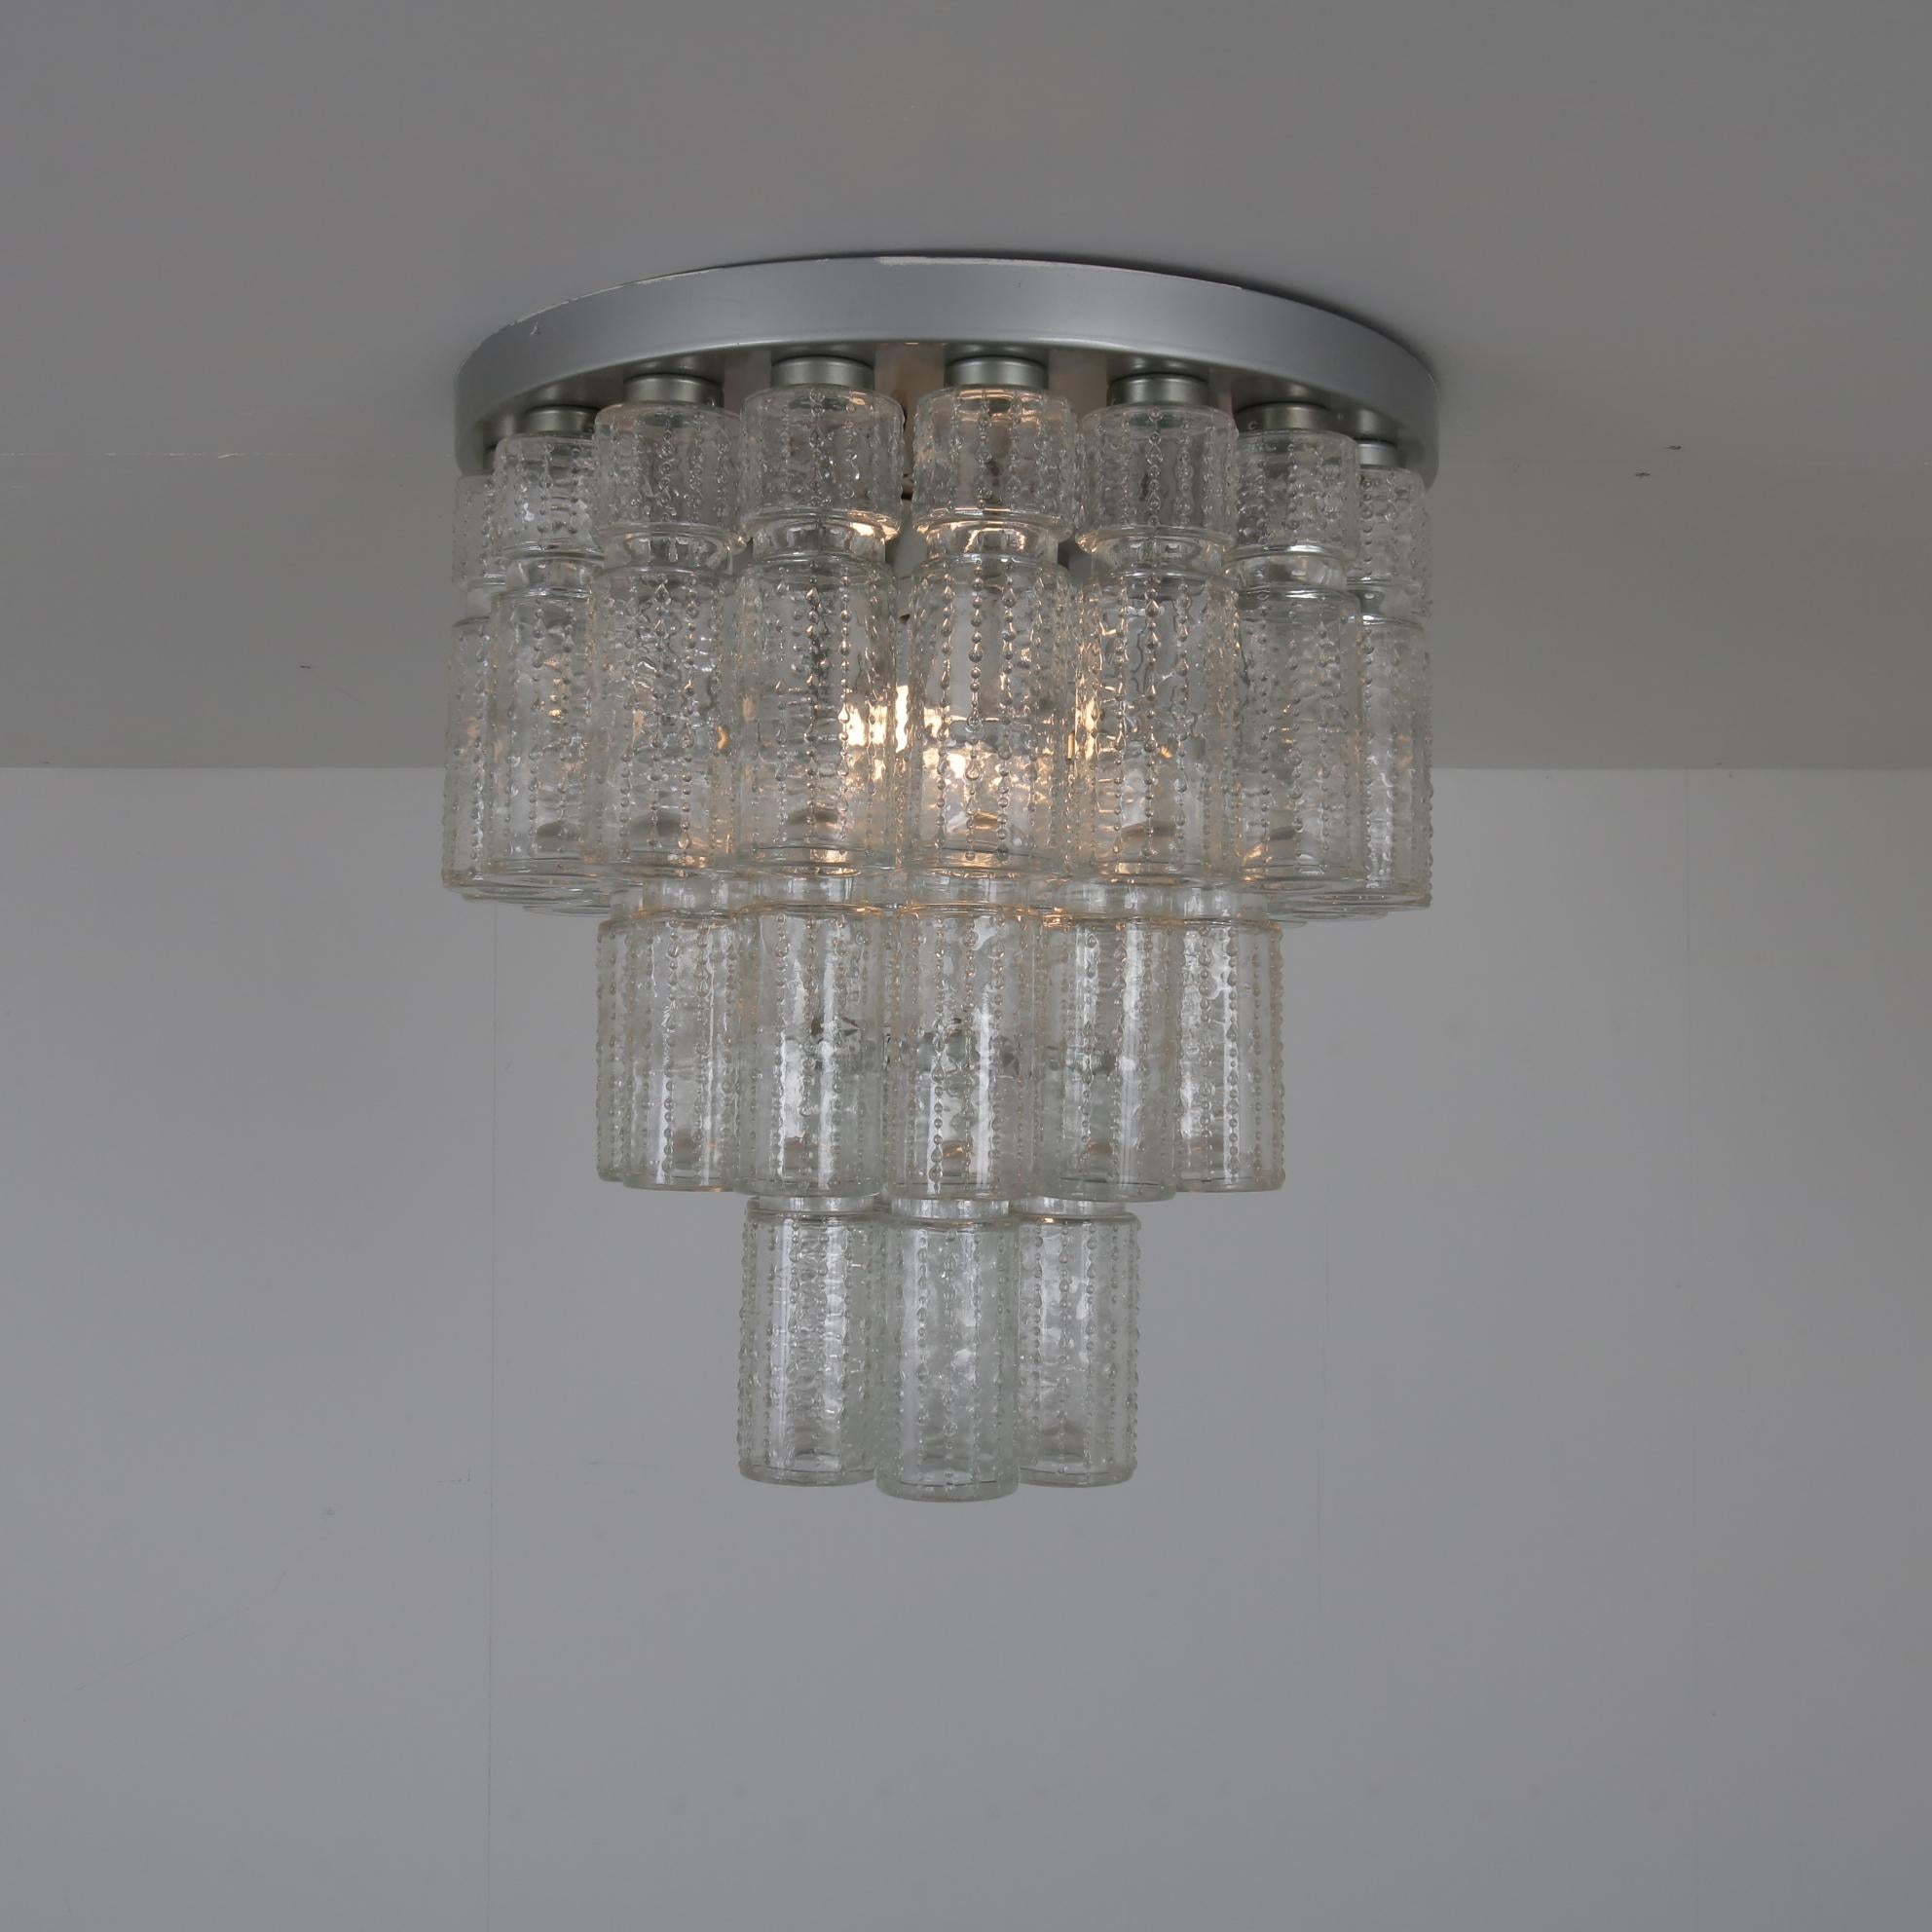 Metal “Lightfall” Ceiling Lamp by RAAK in the Netherlands, 1960s For Sale